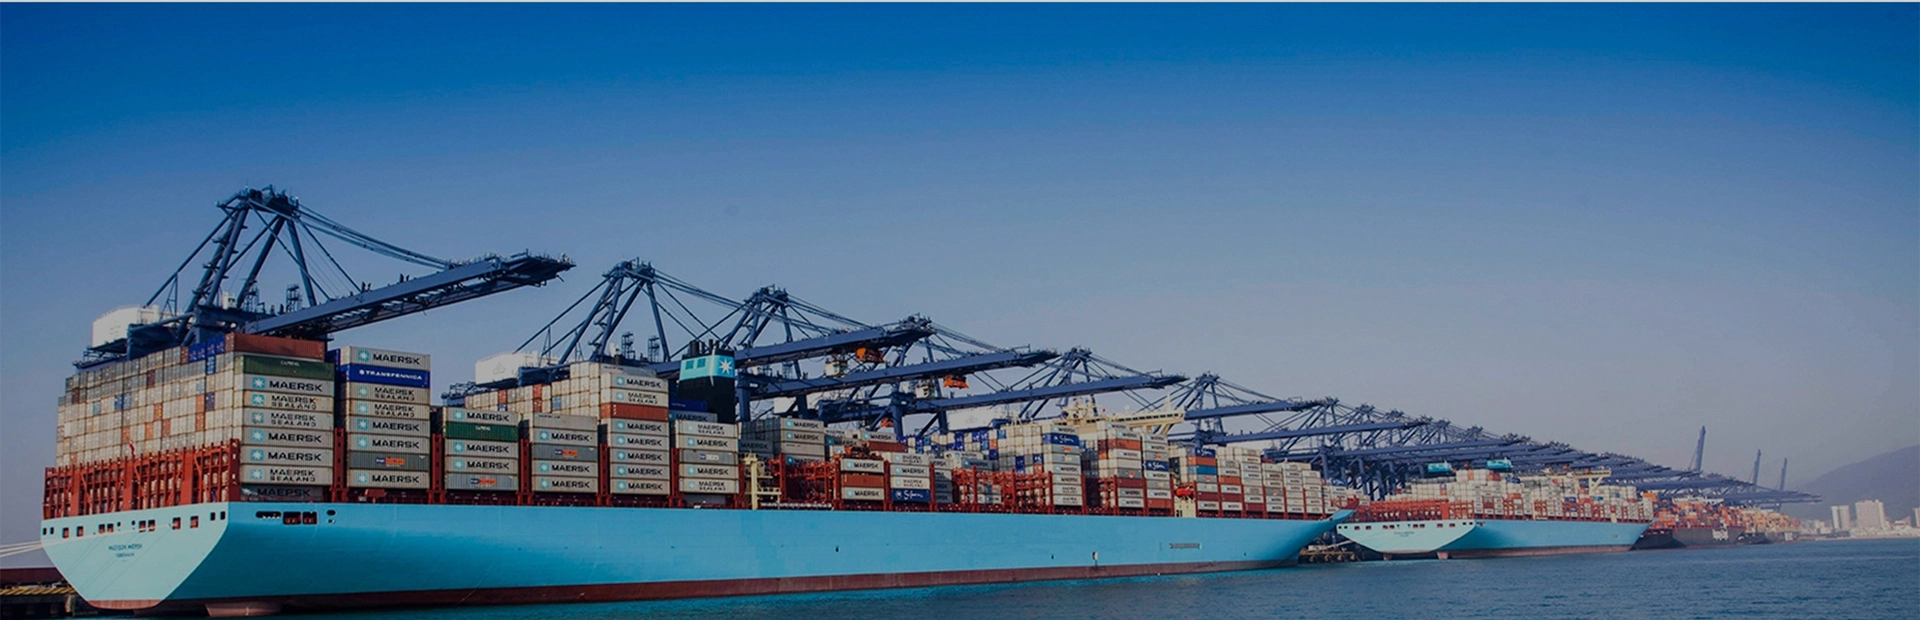 Global Ocean Freight Trends: What's Afloat in the Shipping Industry?